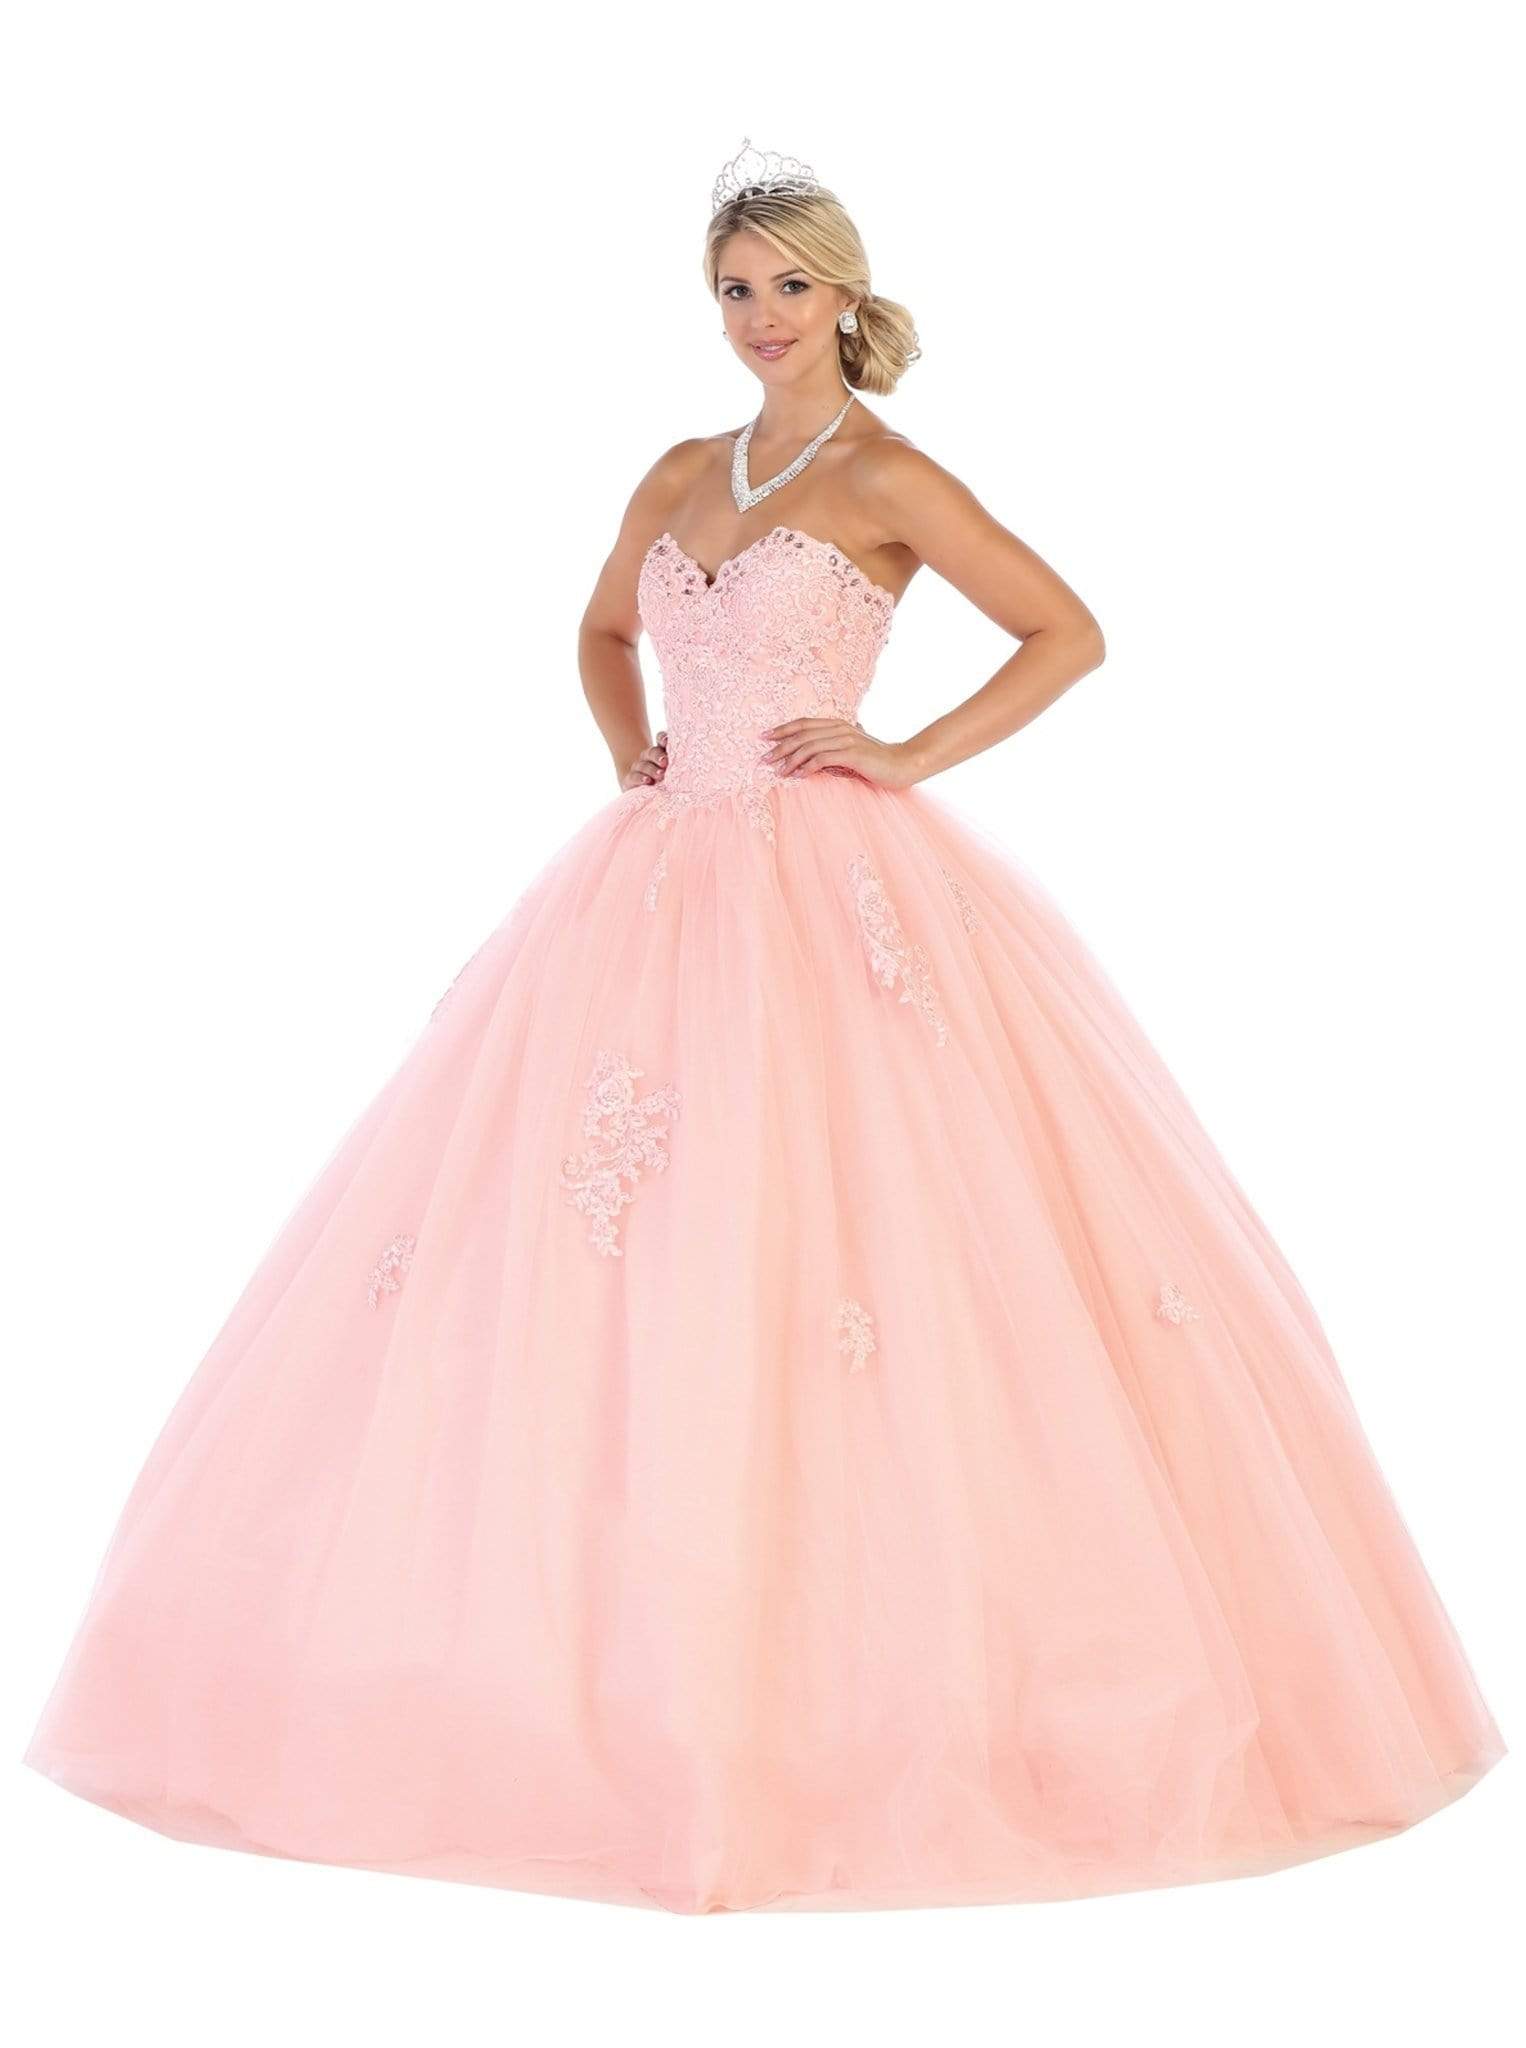 May Queen - LK107 Strapless Scalloped Corset Appliqued Ballgown